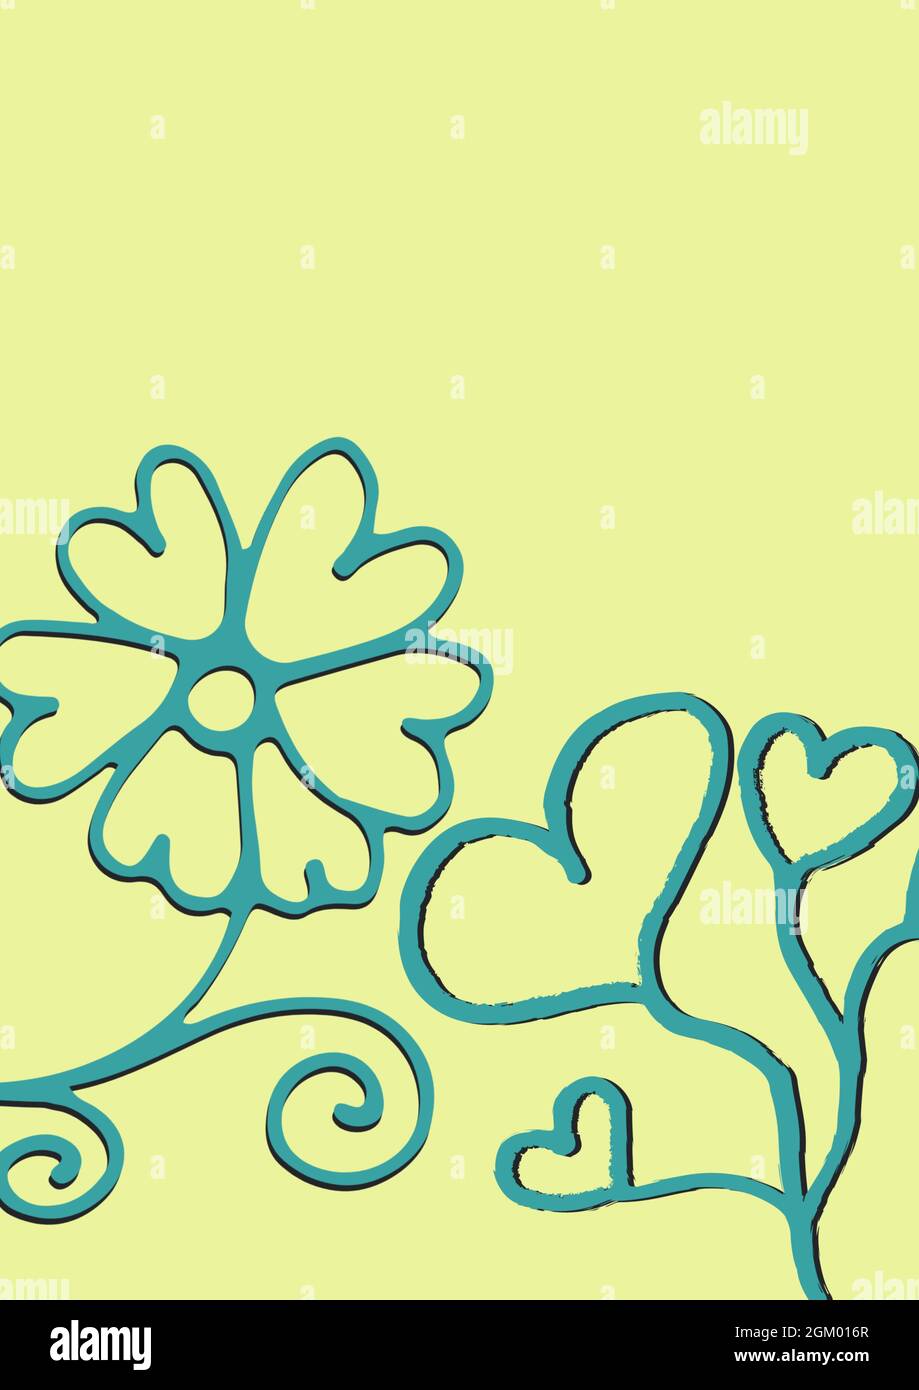 Digitally generated image of blue floral design against yellow background Stock Photo